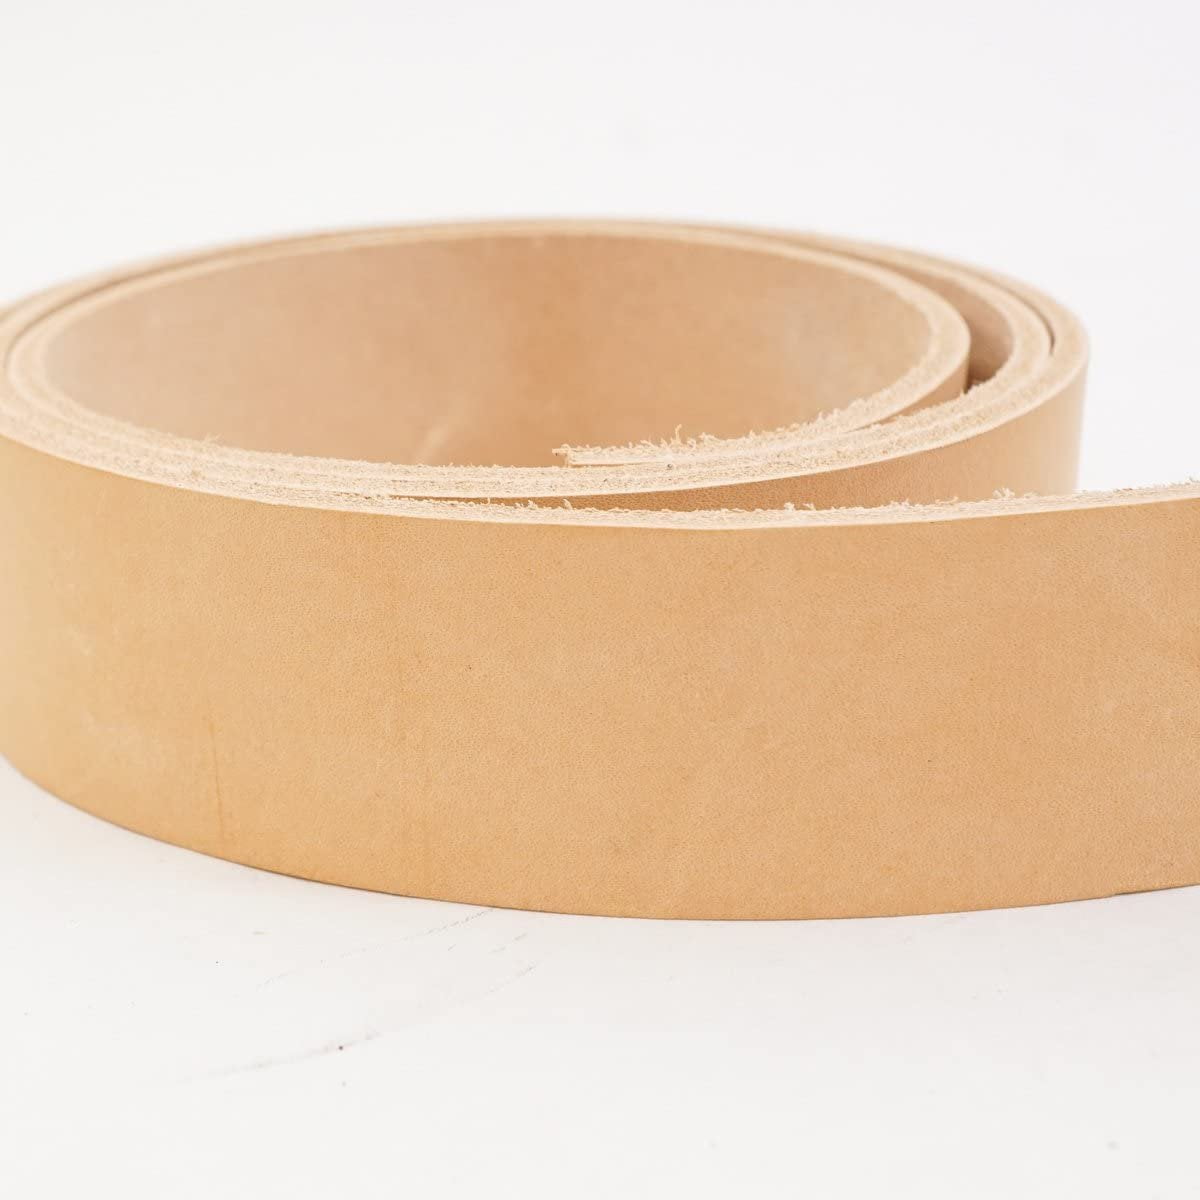 3 4mm Thick 8" X 12" VEG TAN 1 A4 VEG TANNED CRAFT LEATHER HIDE PIECES 2 